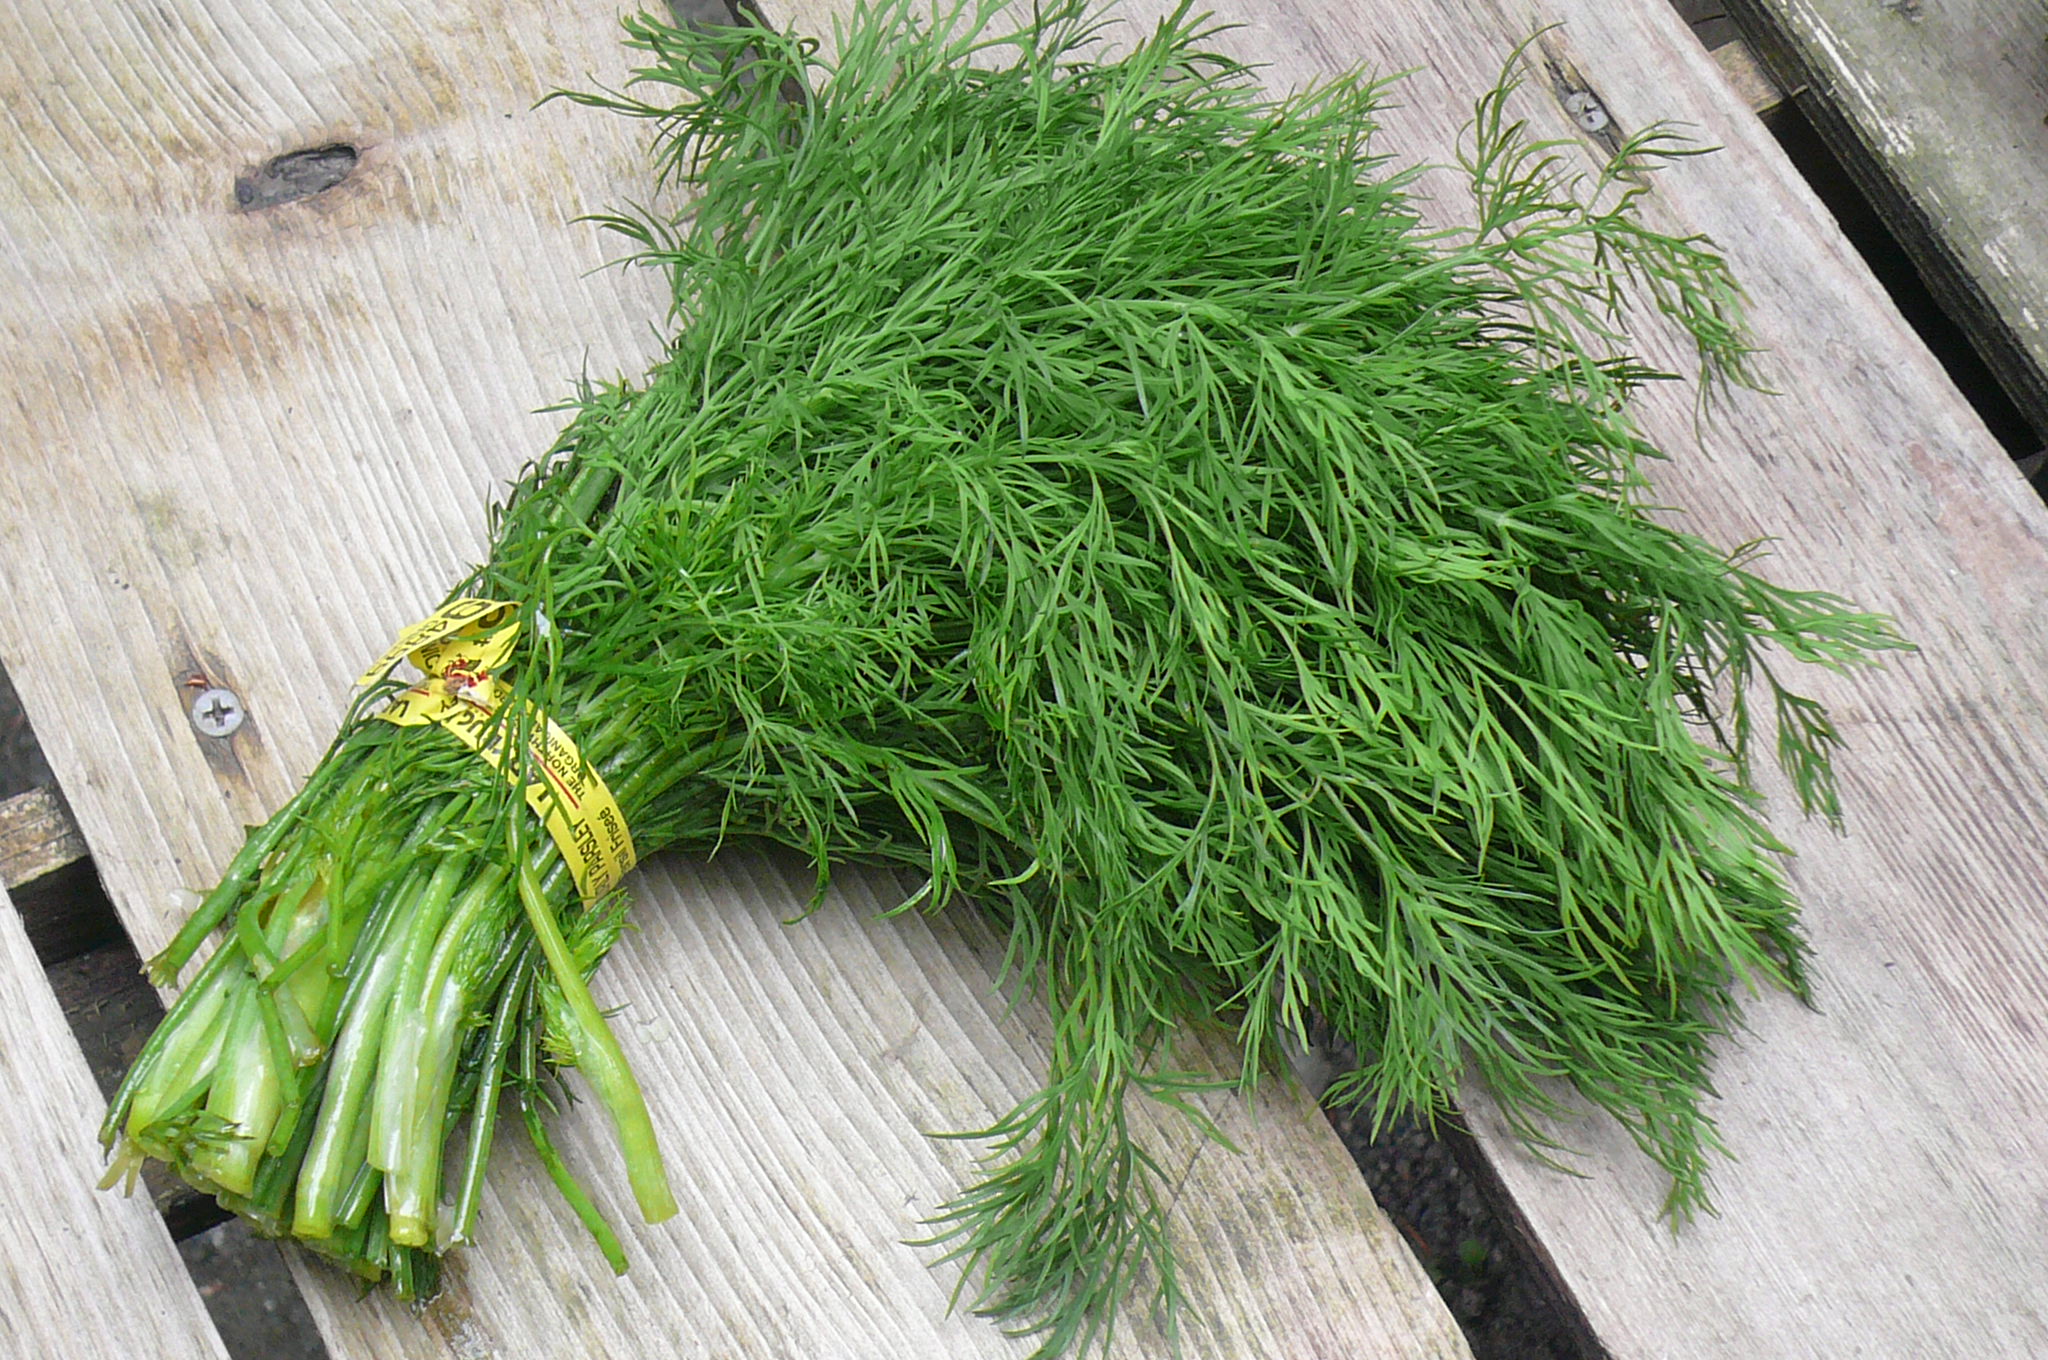 dill, bunched